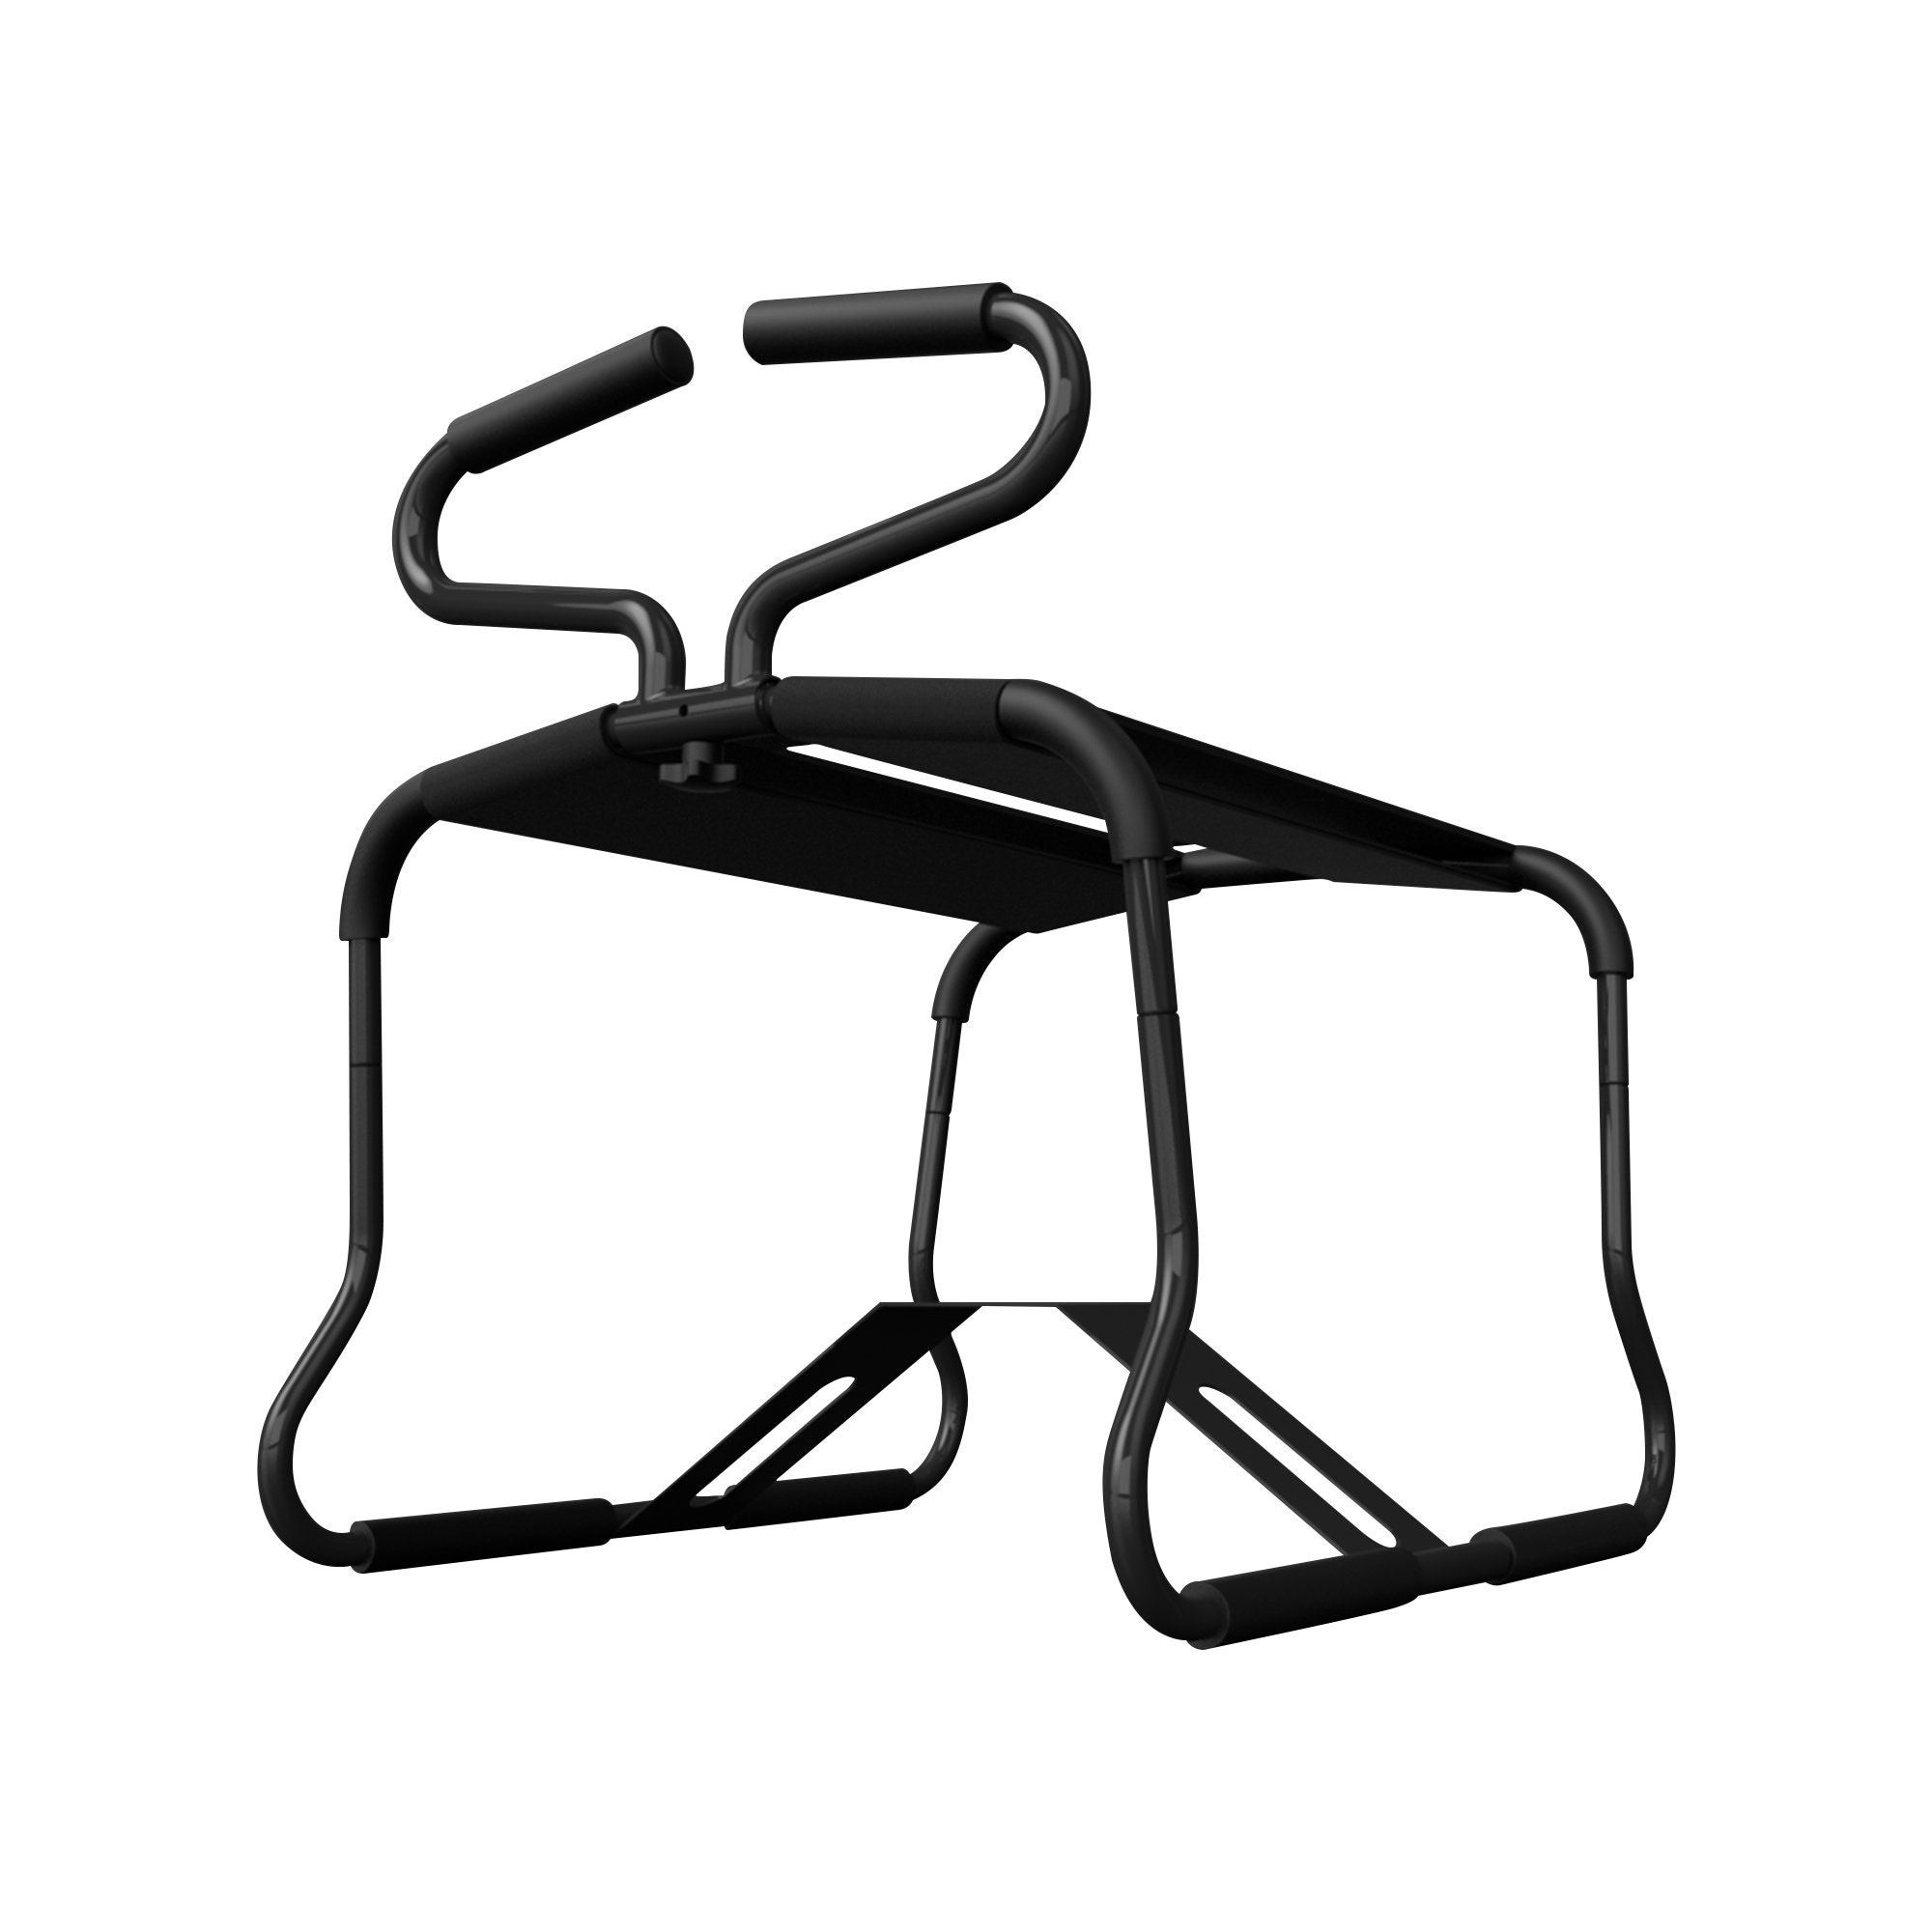 Couples Multifunctional Bouncing Chair Positioning Enhancement Chair Adult Toys Suitable For Indoor Or Outdoor Use Durable And Easy To Assemble/disassemble One Size Can Withstand Up To 300 Pounds 